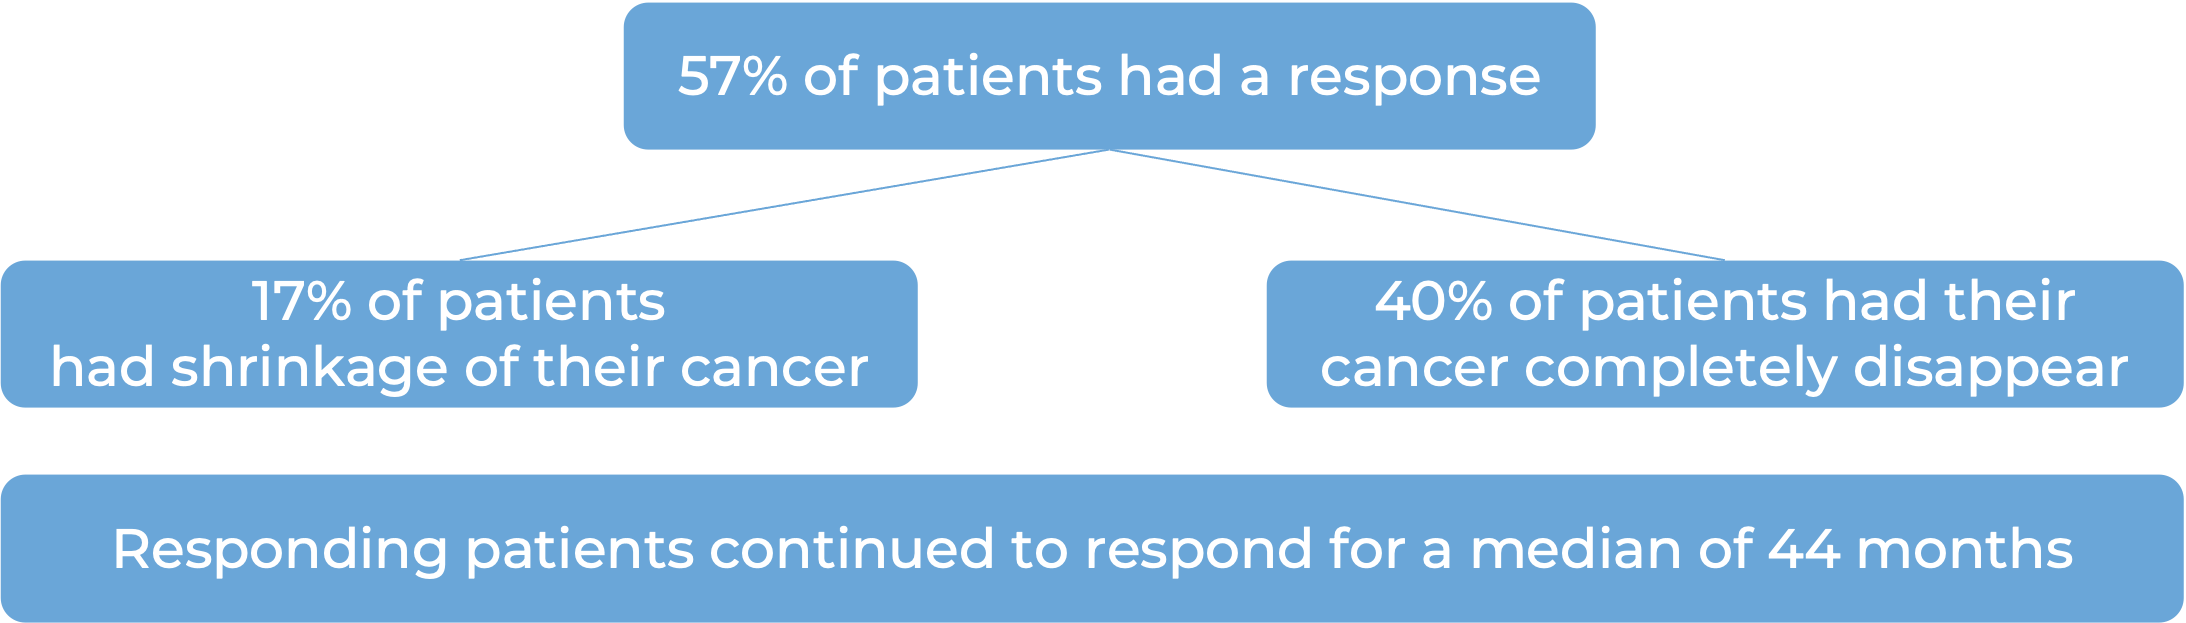 Results of the clinical trial (diagram)